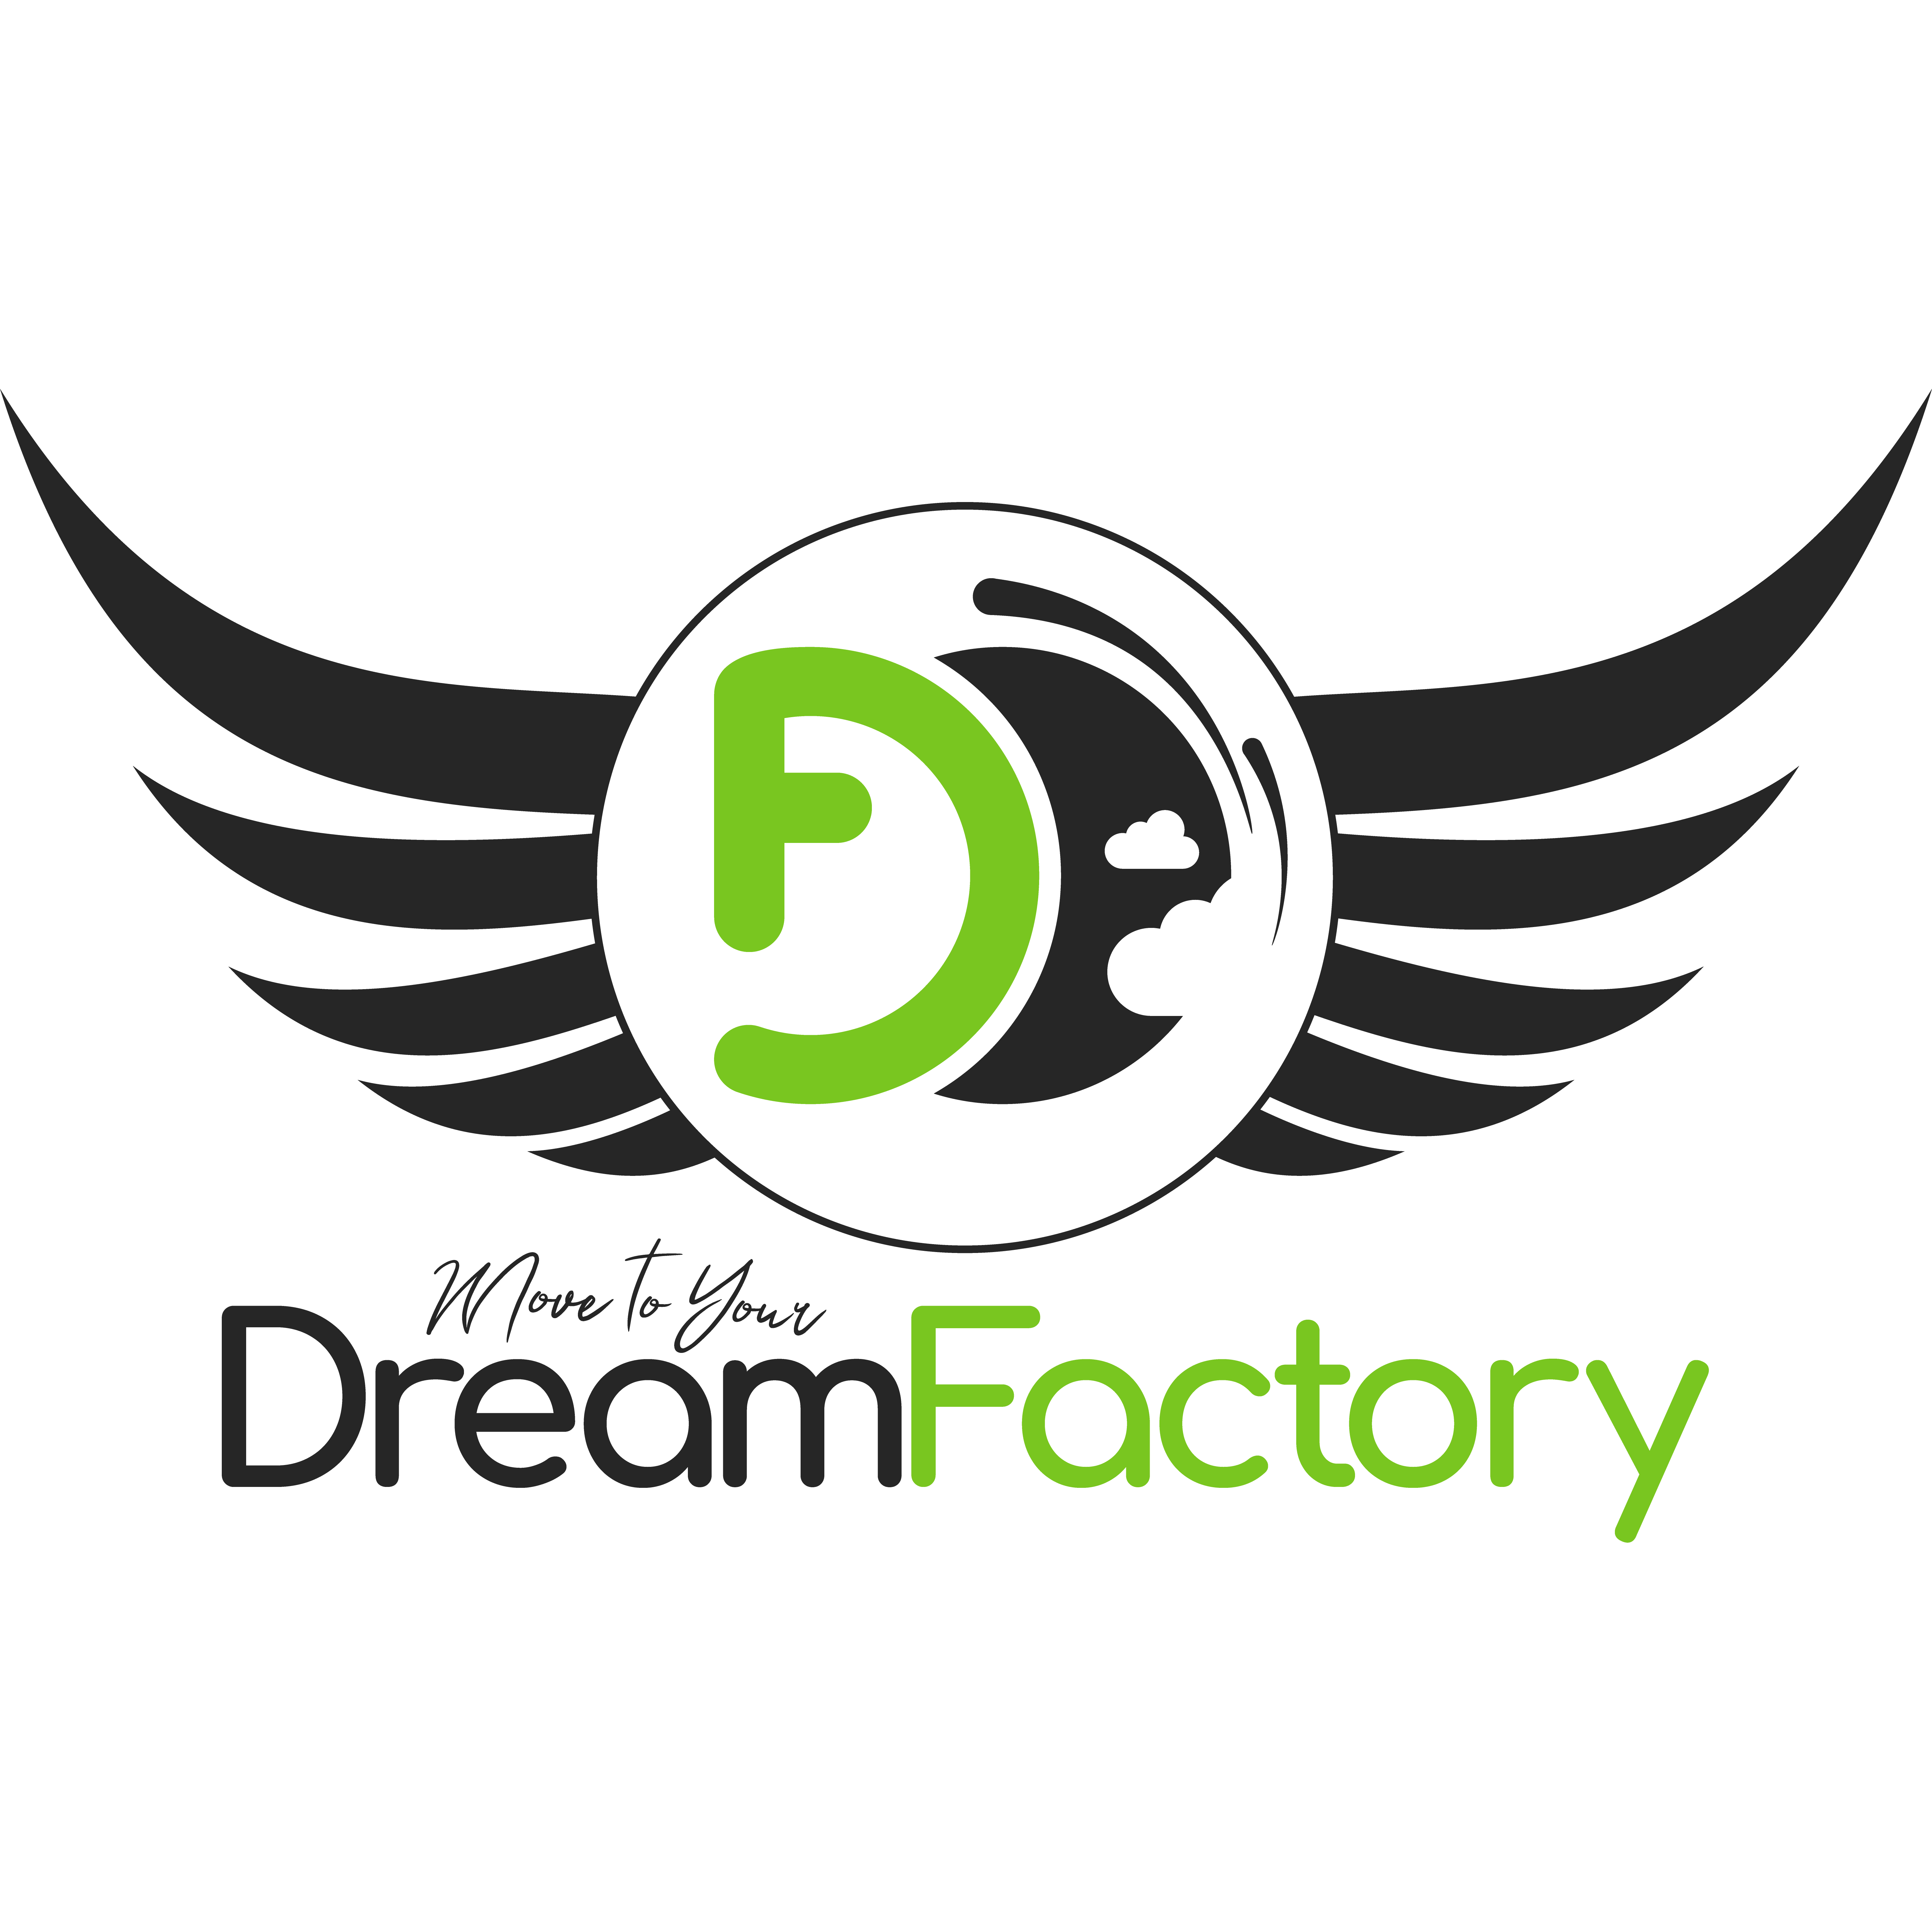 Dreamfactory & Move to selfness & Herbalife Logo